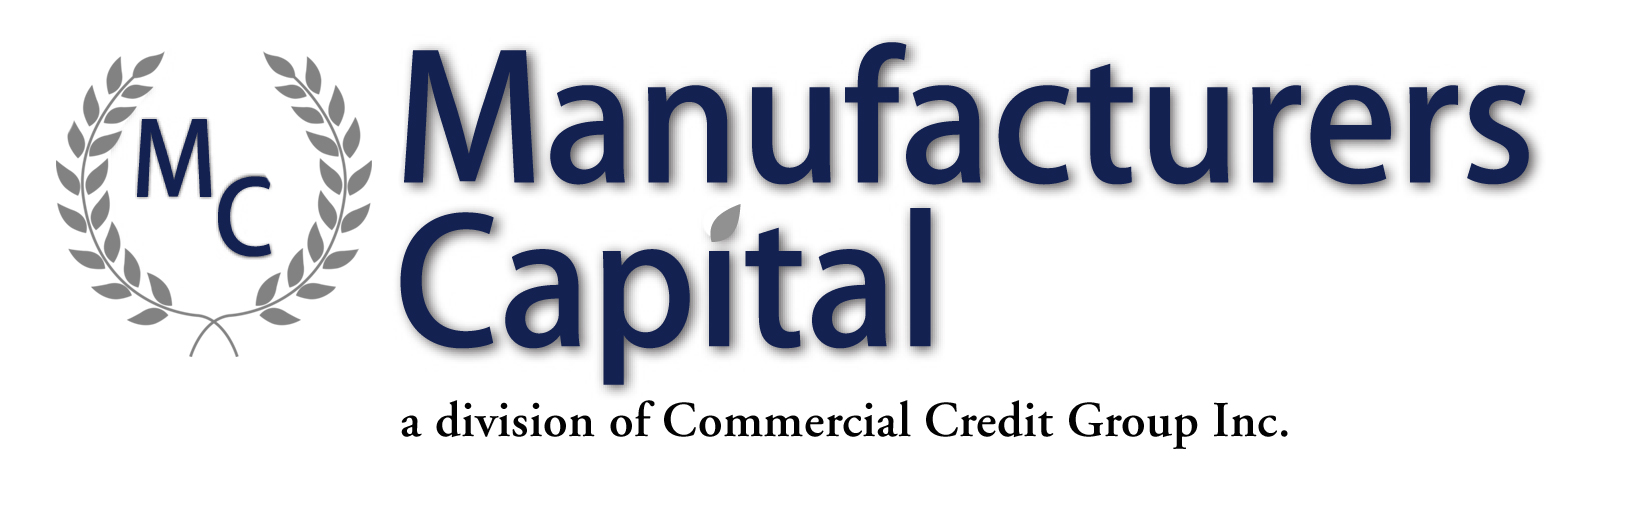 Commercial Credit Group 42